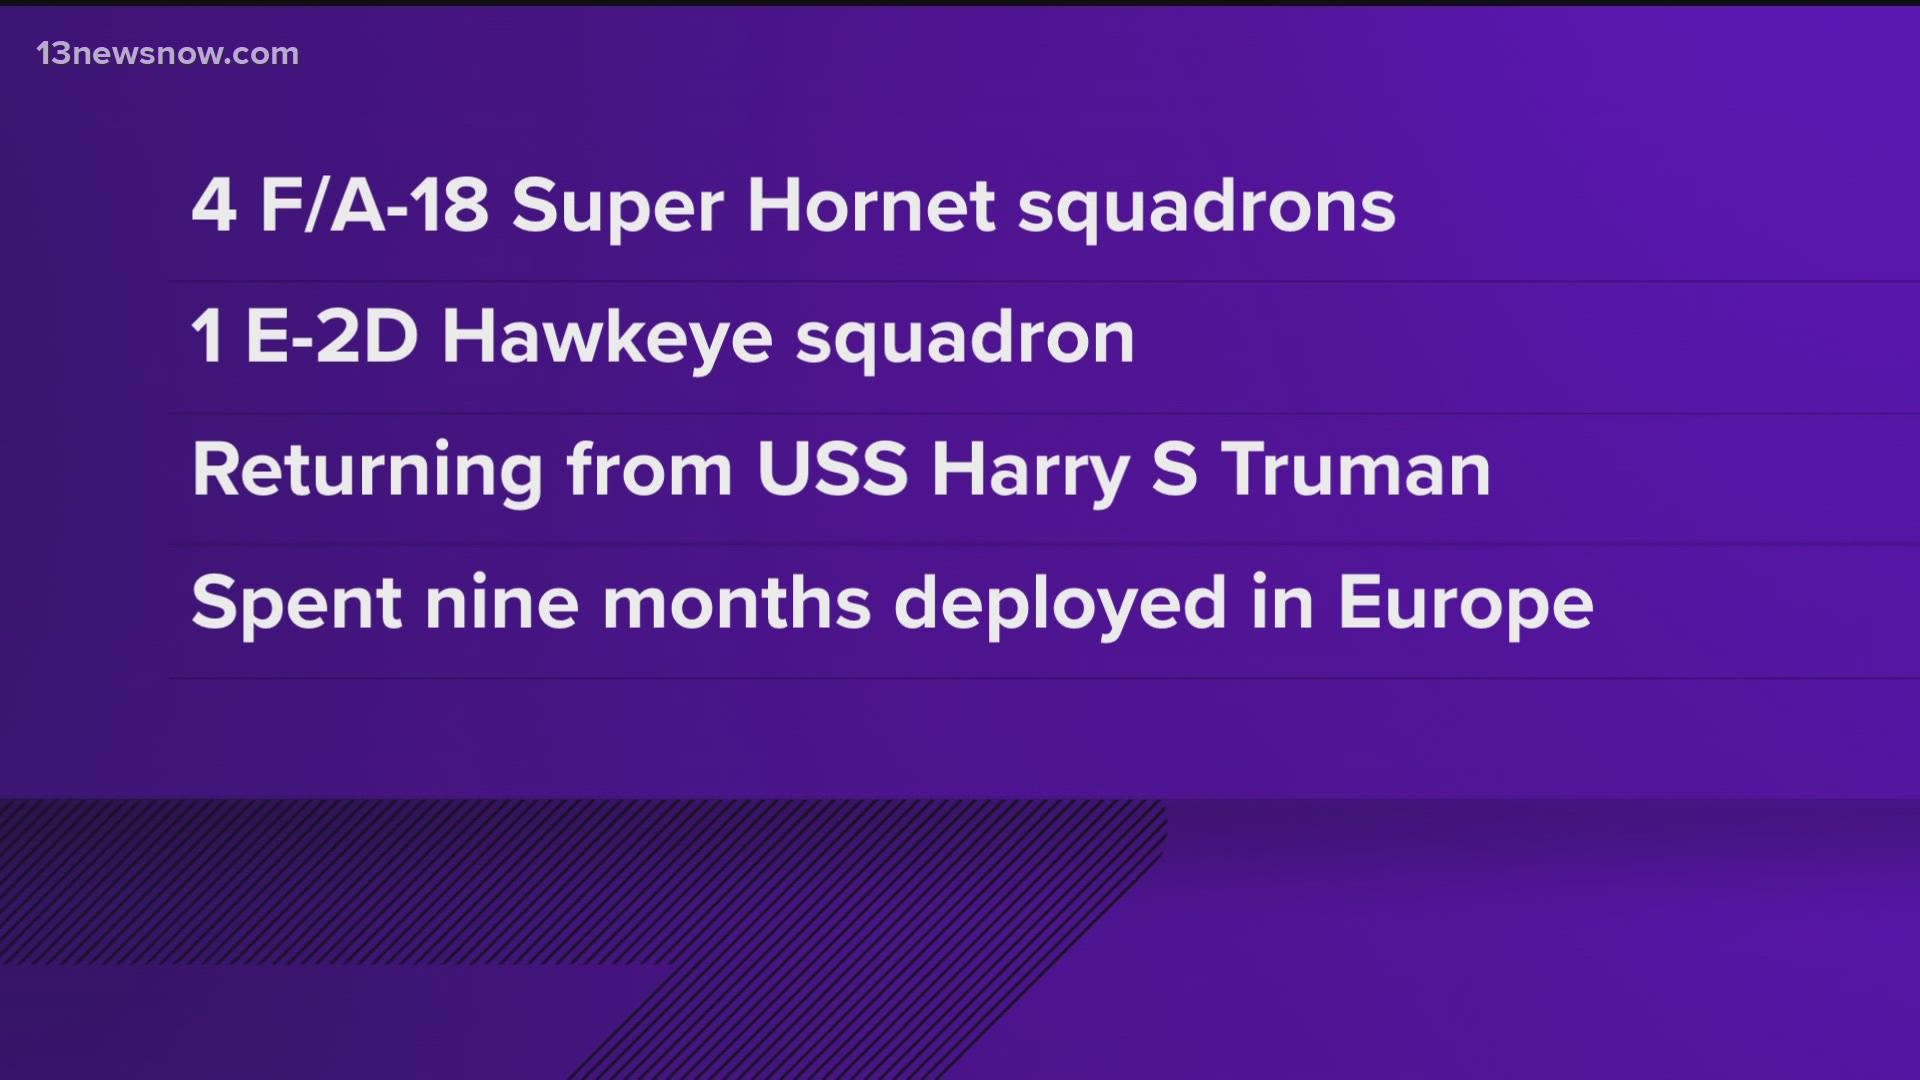 Four of the squadrons are the F/A-18E/F Super Hornets and the fifth is the E-2D Hawkeye squadron.